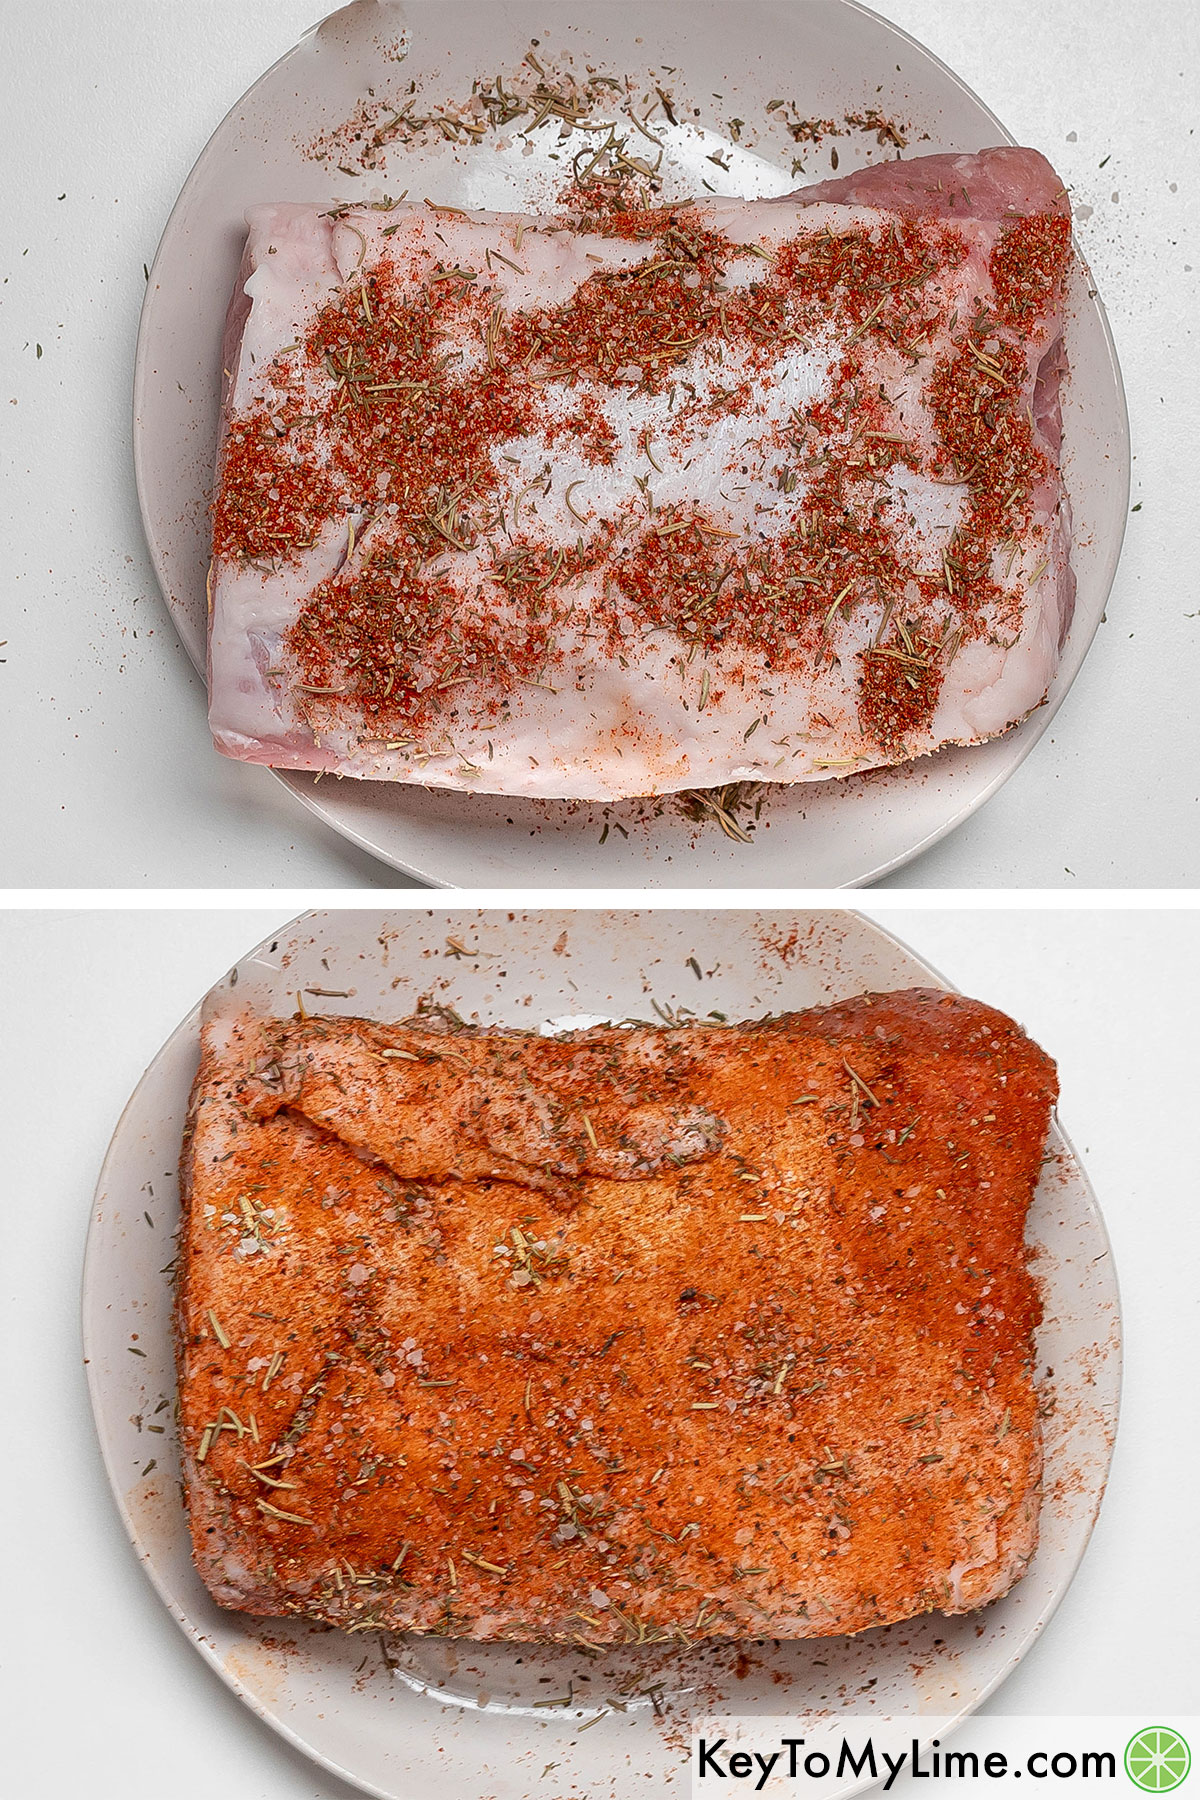 Sprinkling the dry rub mixture evenly over the dry pork loin and rubbing in as you go.